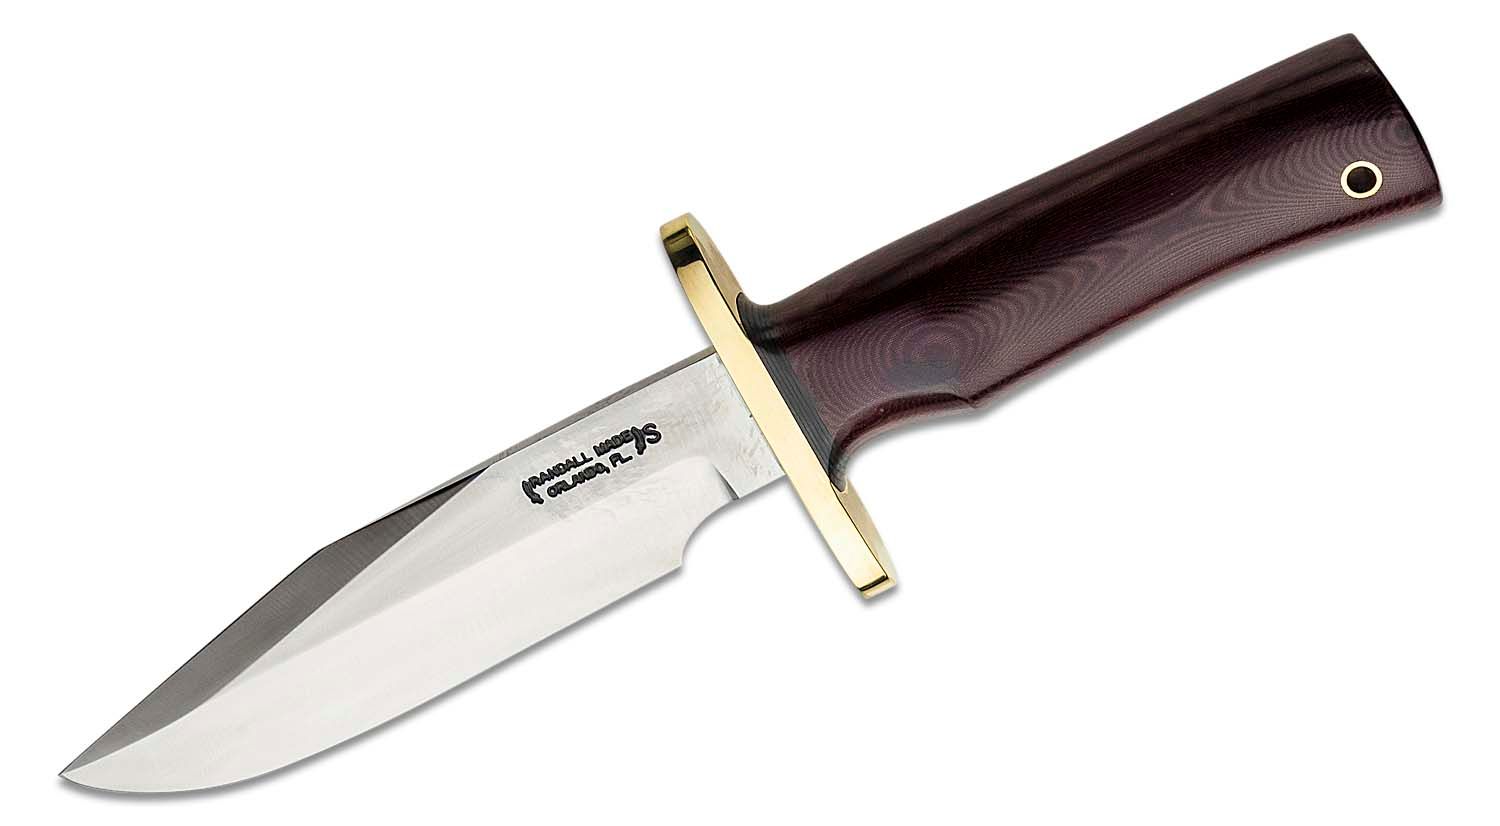 Randall Made Knives Custom Model 15 Airman Fixed Blade Knife 5.5" Stainless Steel Sharpened Clip Point, Maroon Leather Sheath - KnifeCenter